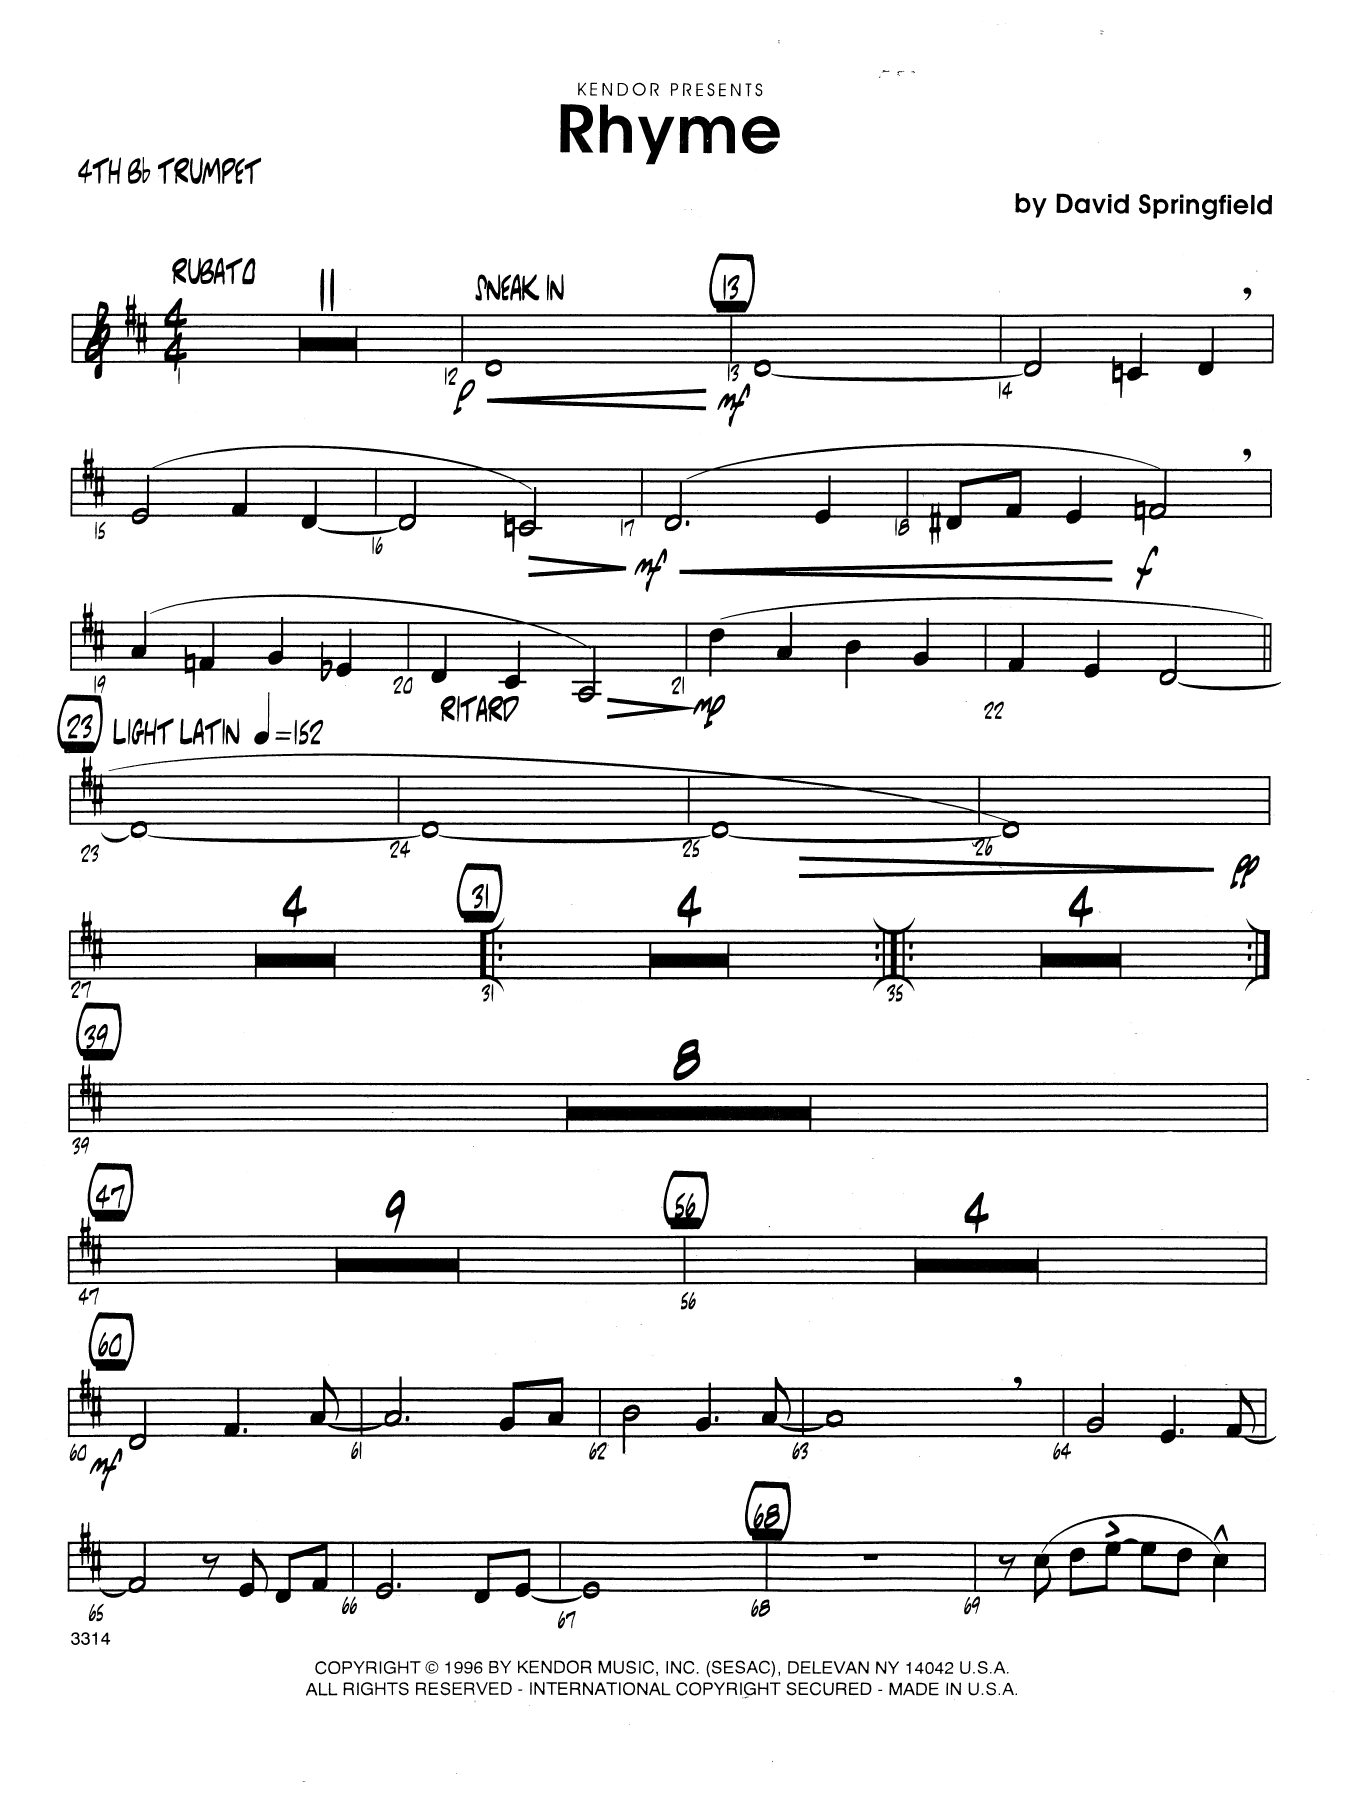 Download Dave Springfield Rhyme - 4th Bb Trumpet Sheet Music